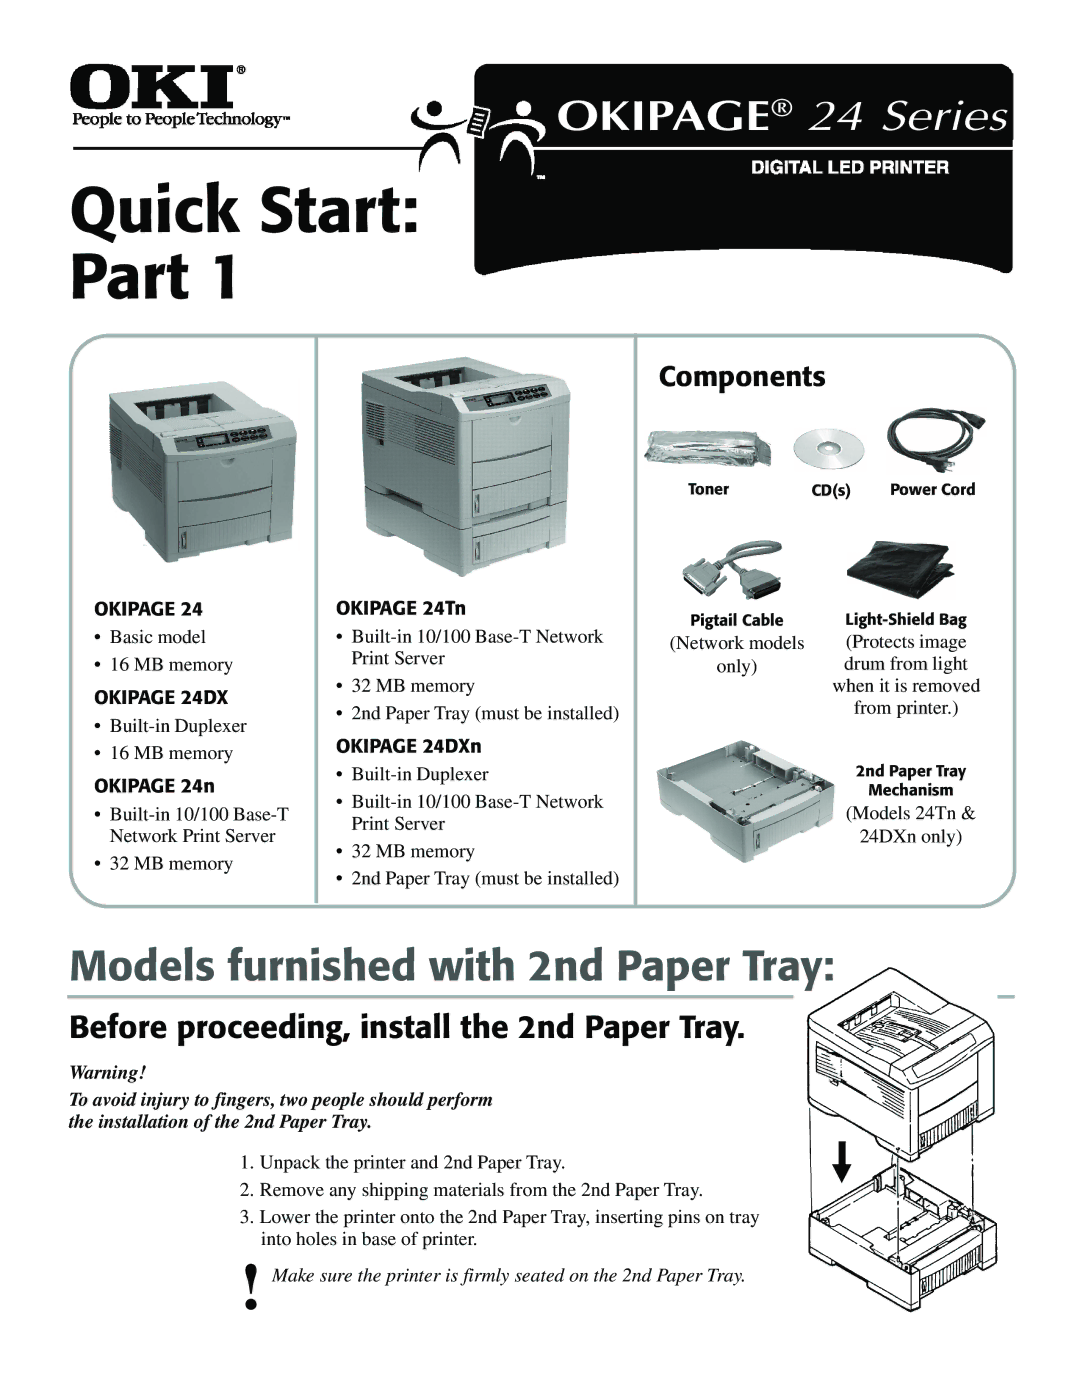 Oki PAGE 24 quick start Components, Okipage 24n, Okipage 24Tn, Okipage 24DXn 